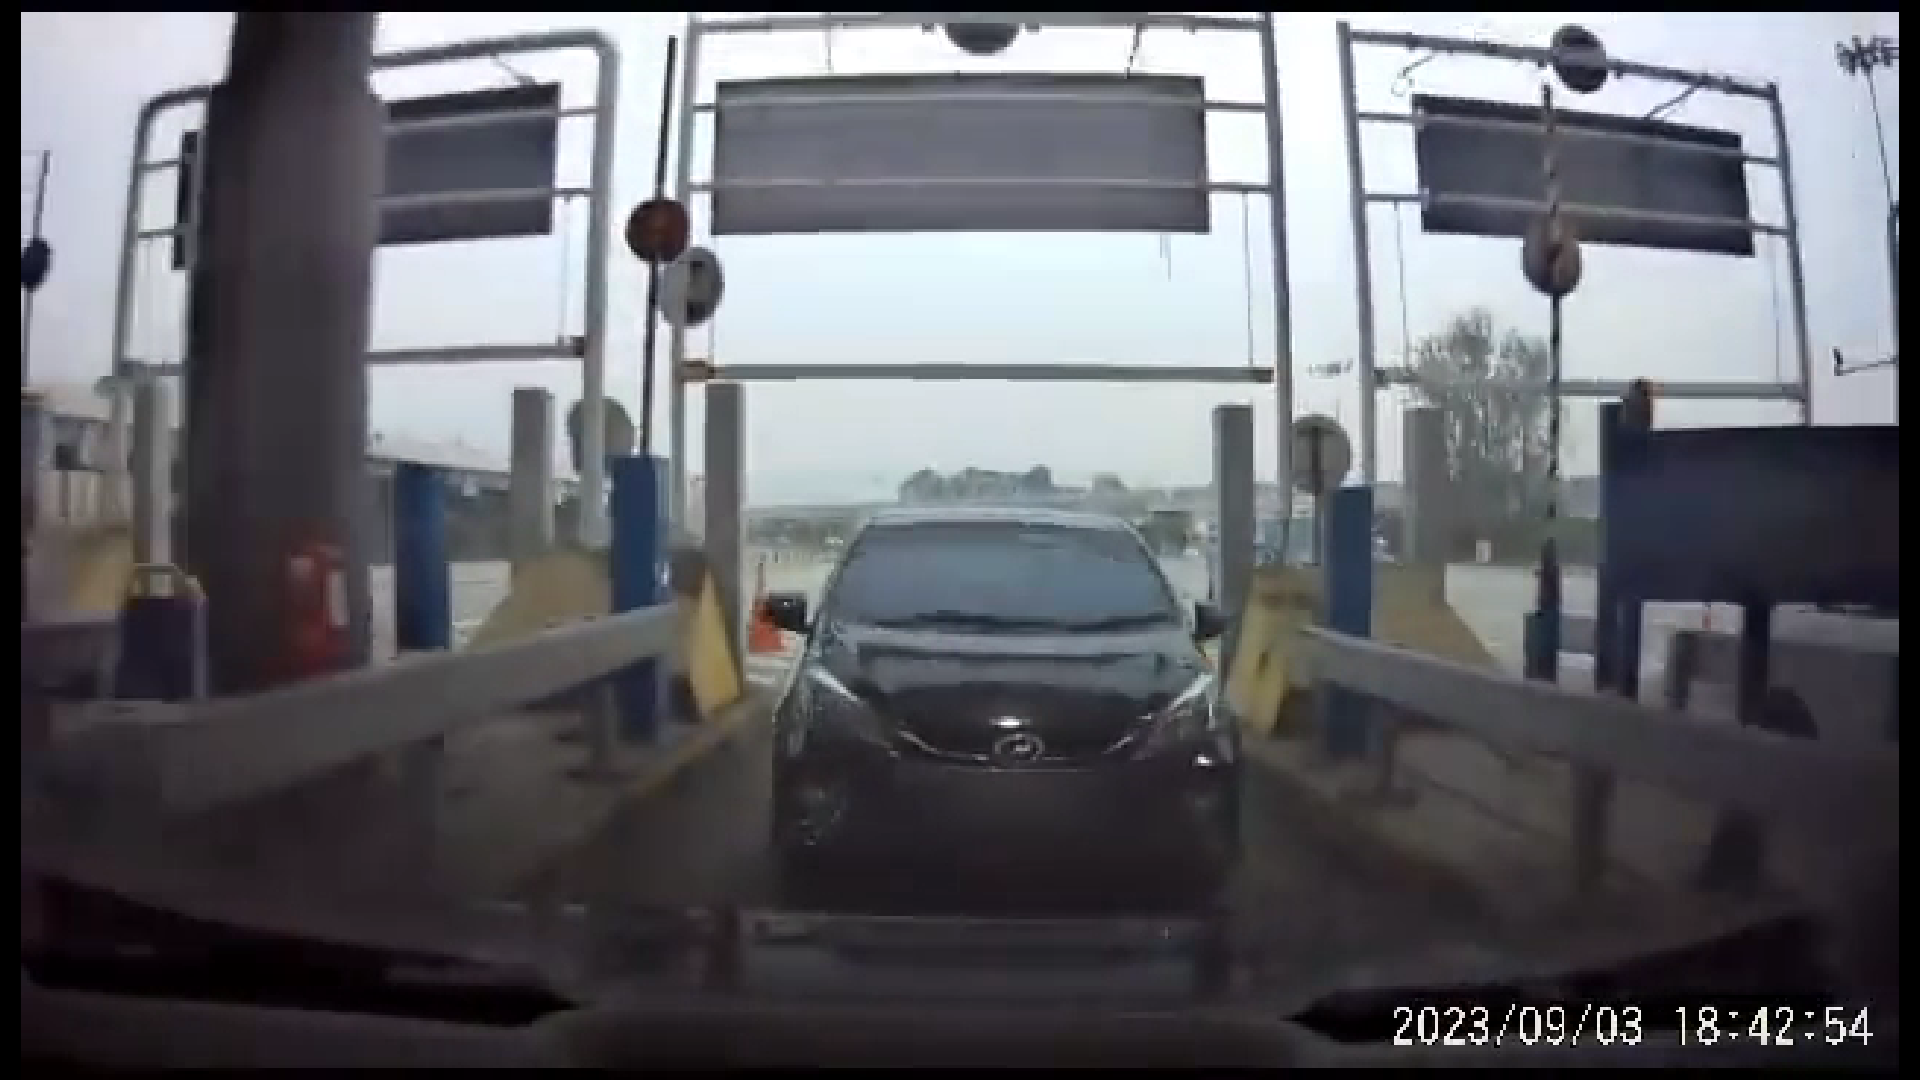 Stingy myvi driver tailgates car in front of it just to skip paying 60 sen toll | weirdkaya